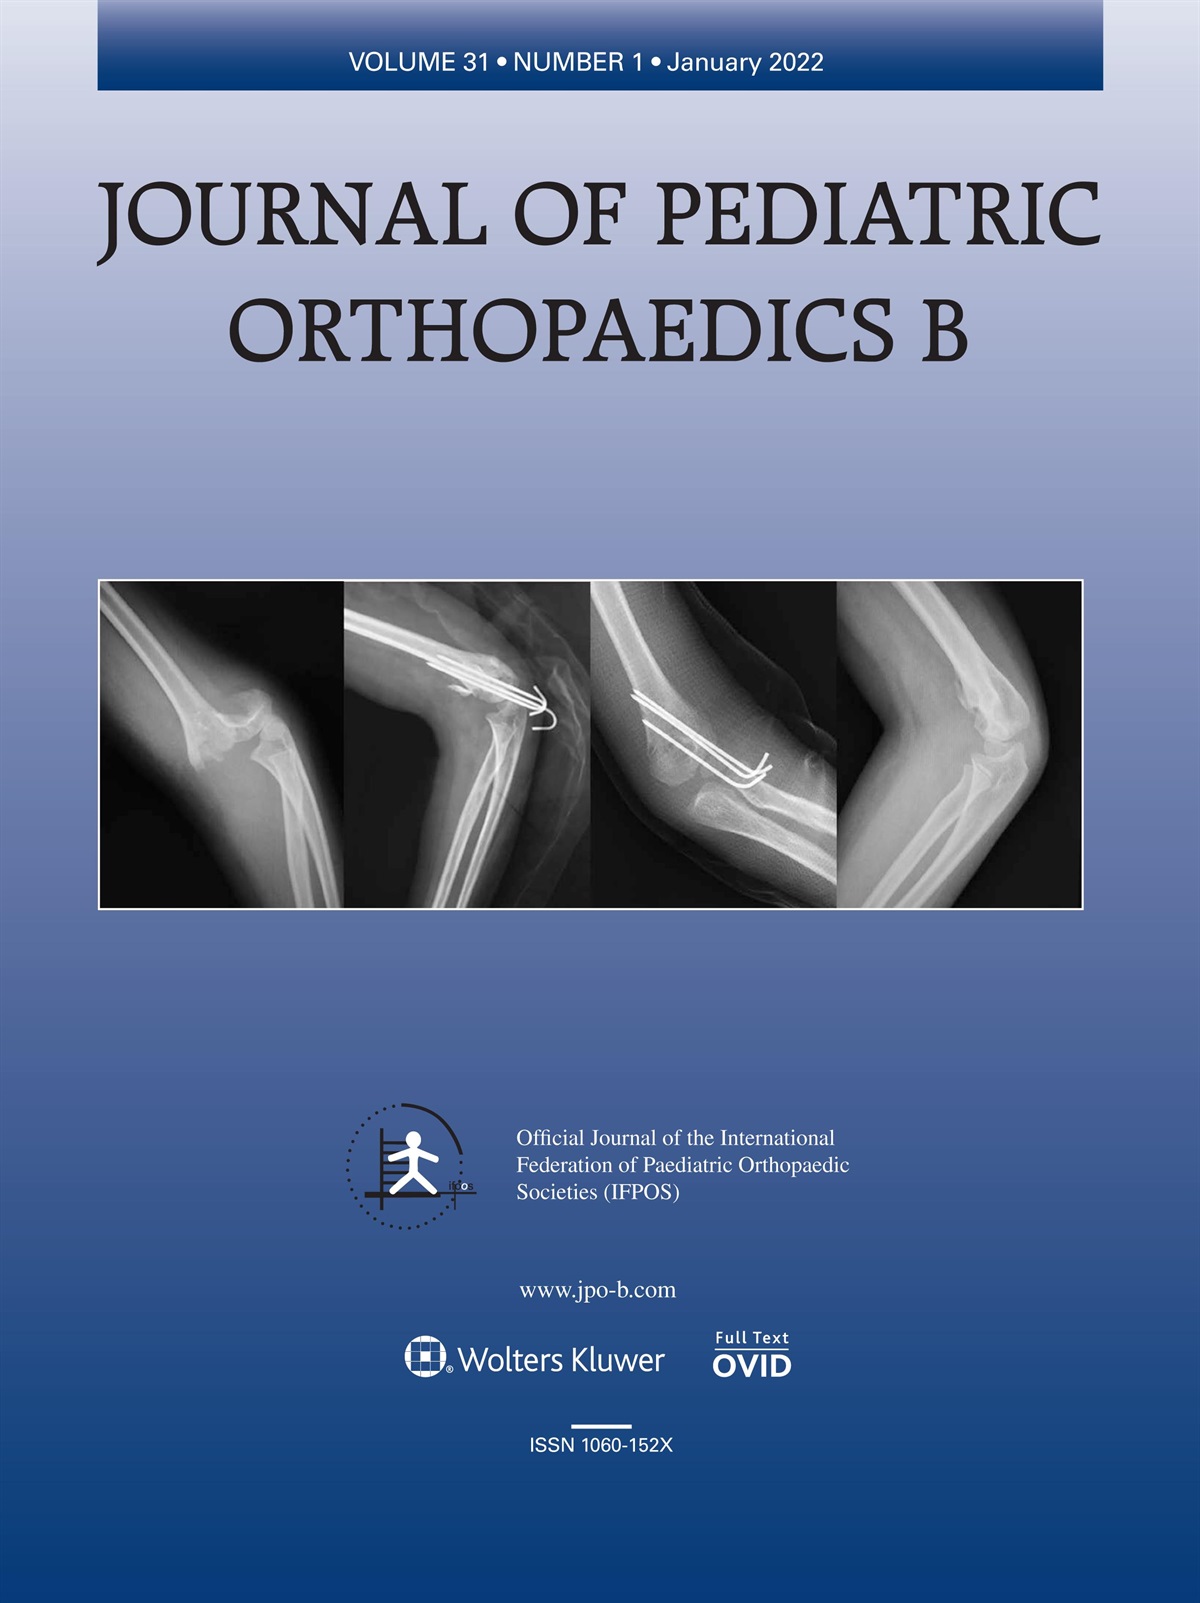 Minimally displaced pediatric humerus lateral condyle fractures: risk factors for displacement and outcomes of delayed surgery – Edmonds EW, Bland DC, Bastrom TP, Smith MM, Upasani VV, Yaszay B, Pennock AT. J Pediatr Orthop B 2021; 30:167–173